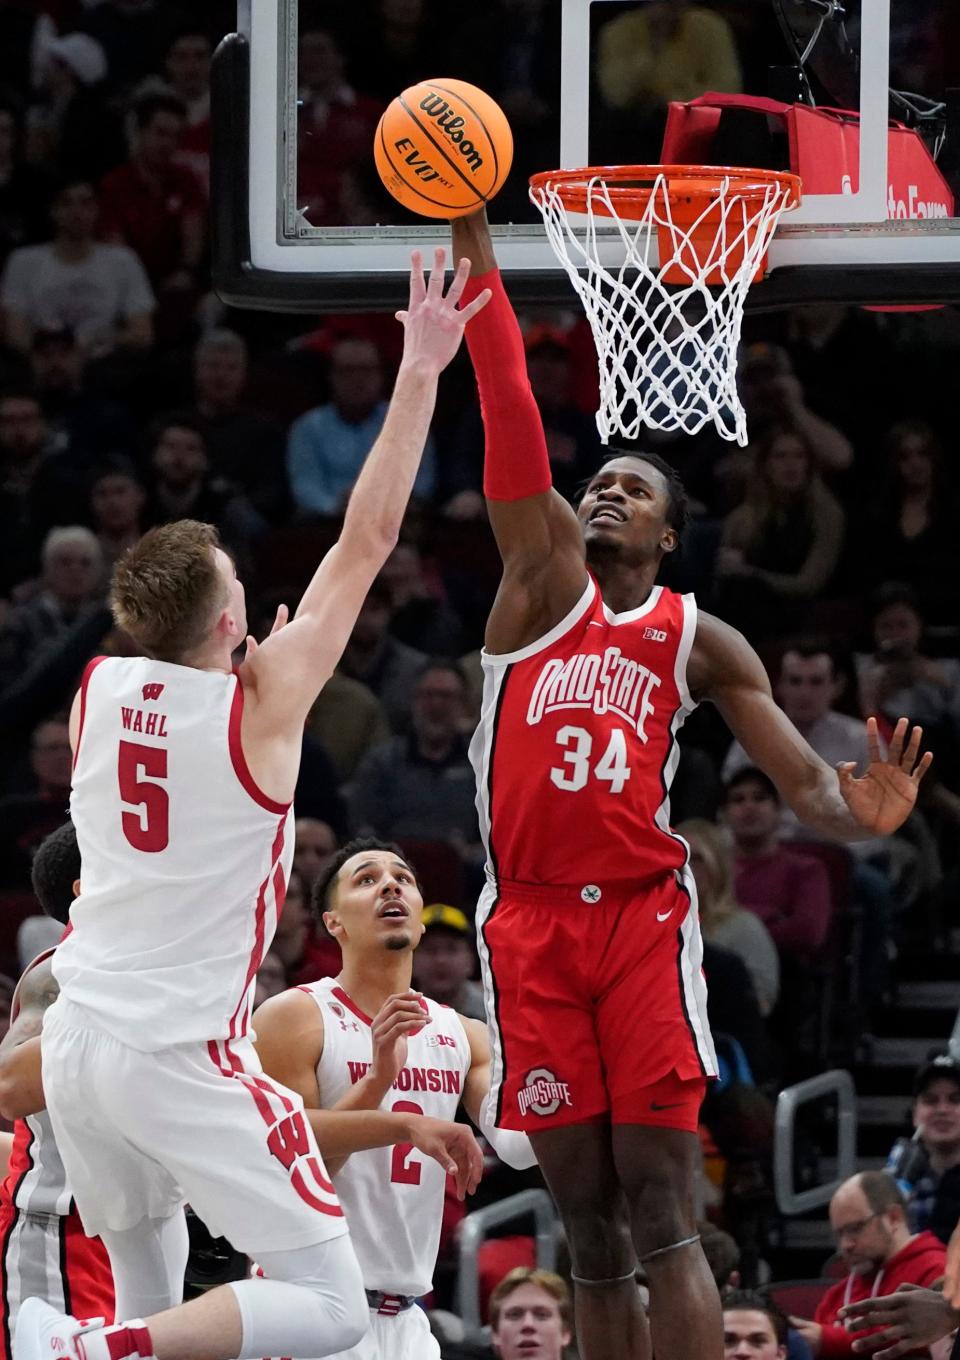 Mar 8, 2023; Chicago, IL, USA; Ohio State Buckeyes center Felix Okpara (34) blocks a shot by Wisconsin Badgers forward Tyler Wahl (5) during the second half at United Center. Mandatory Credit: David Banks-USA TODAY Sports